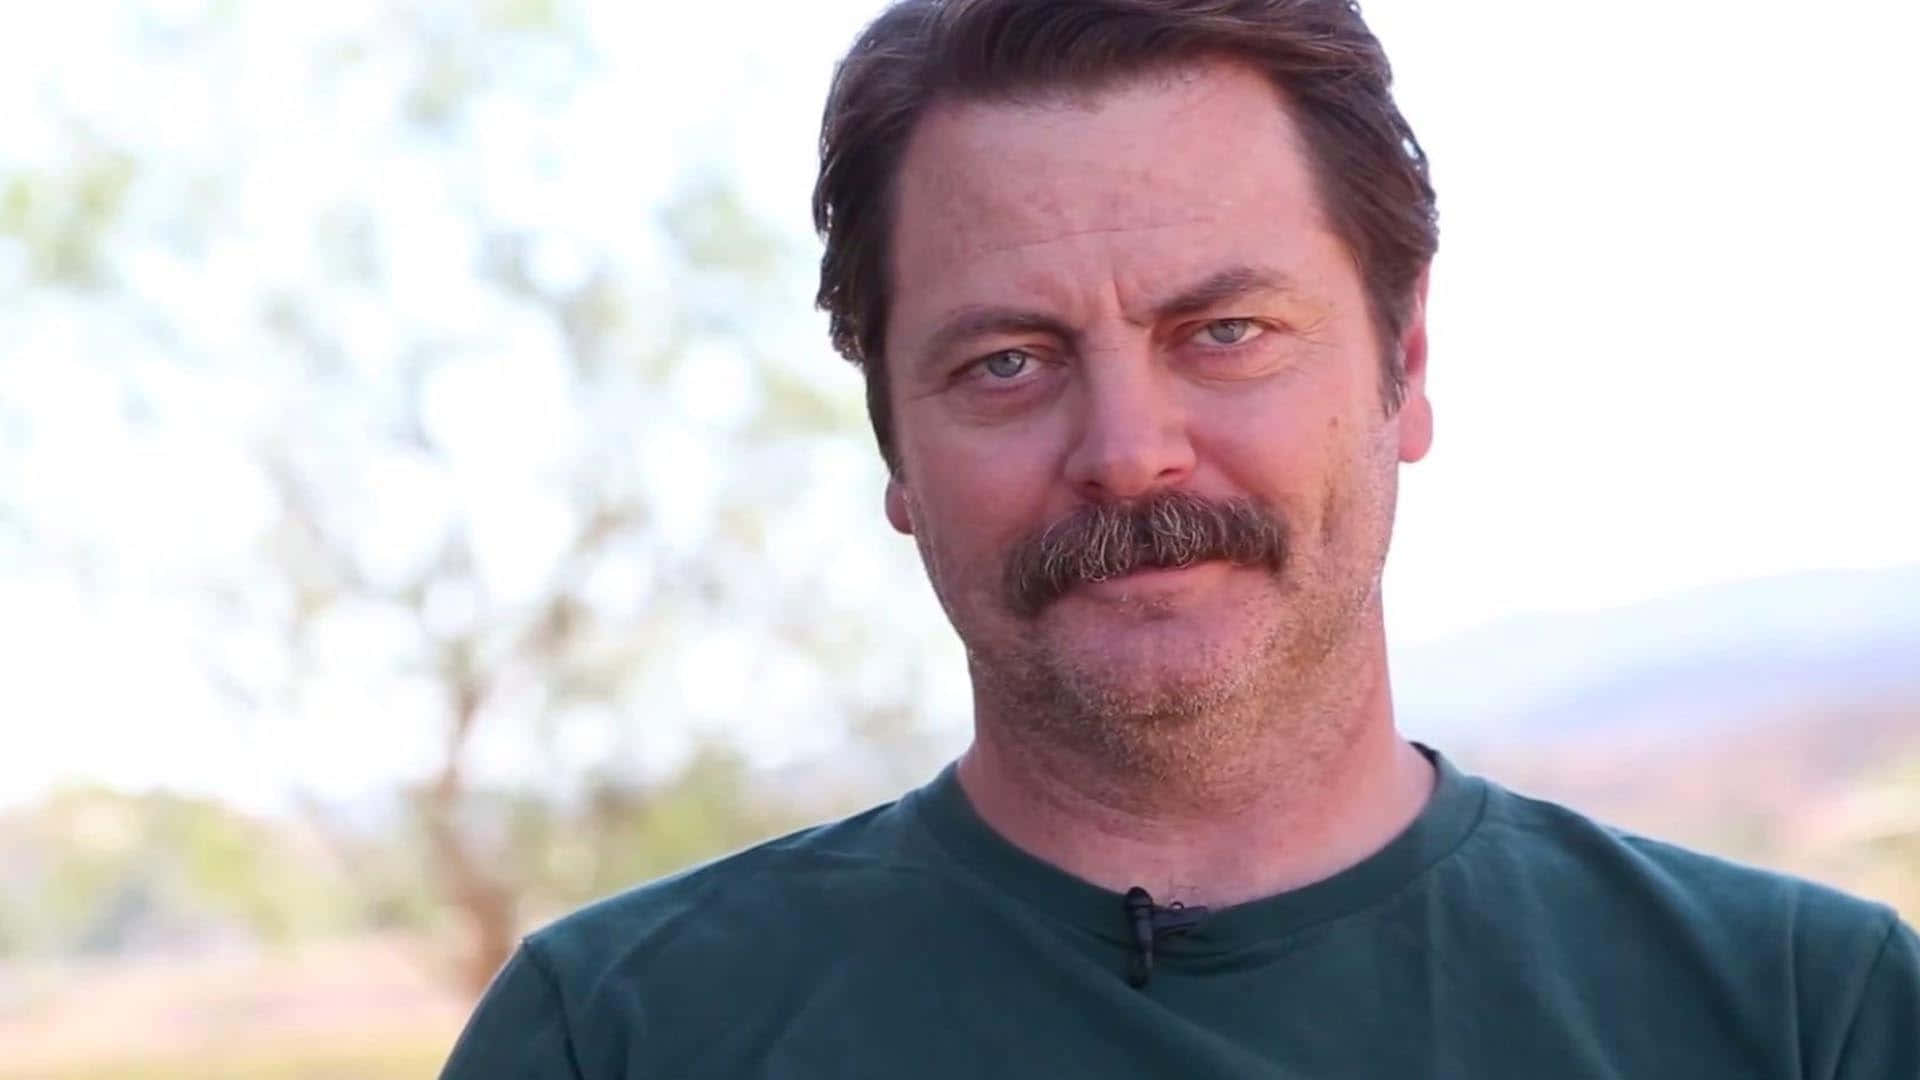 Nick Offerman looks on in an environment of nature and peace. Wallpaper